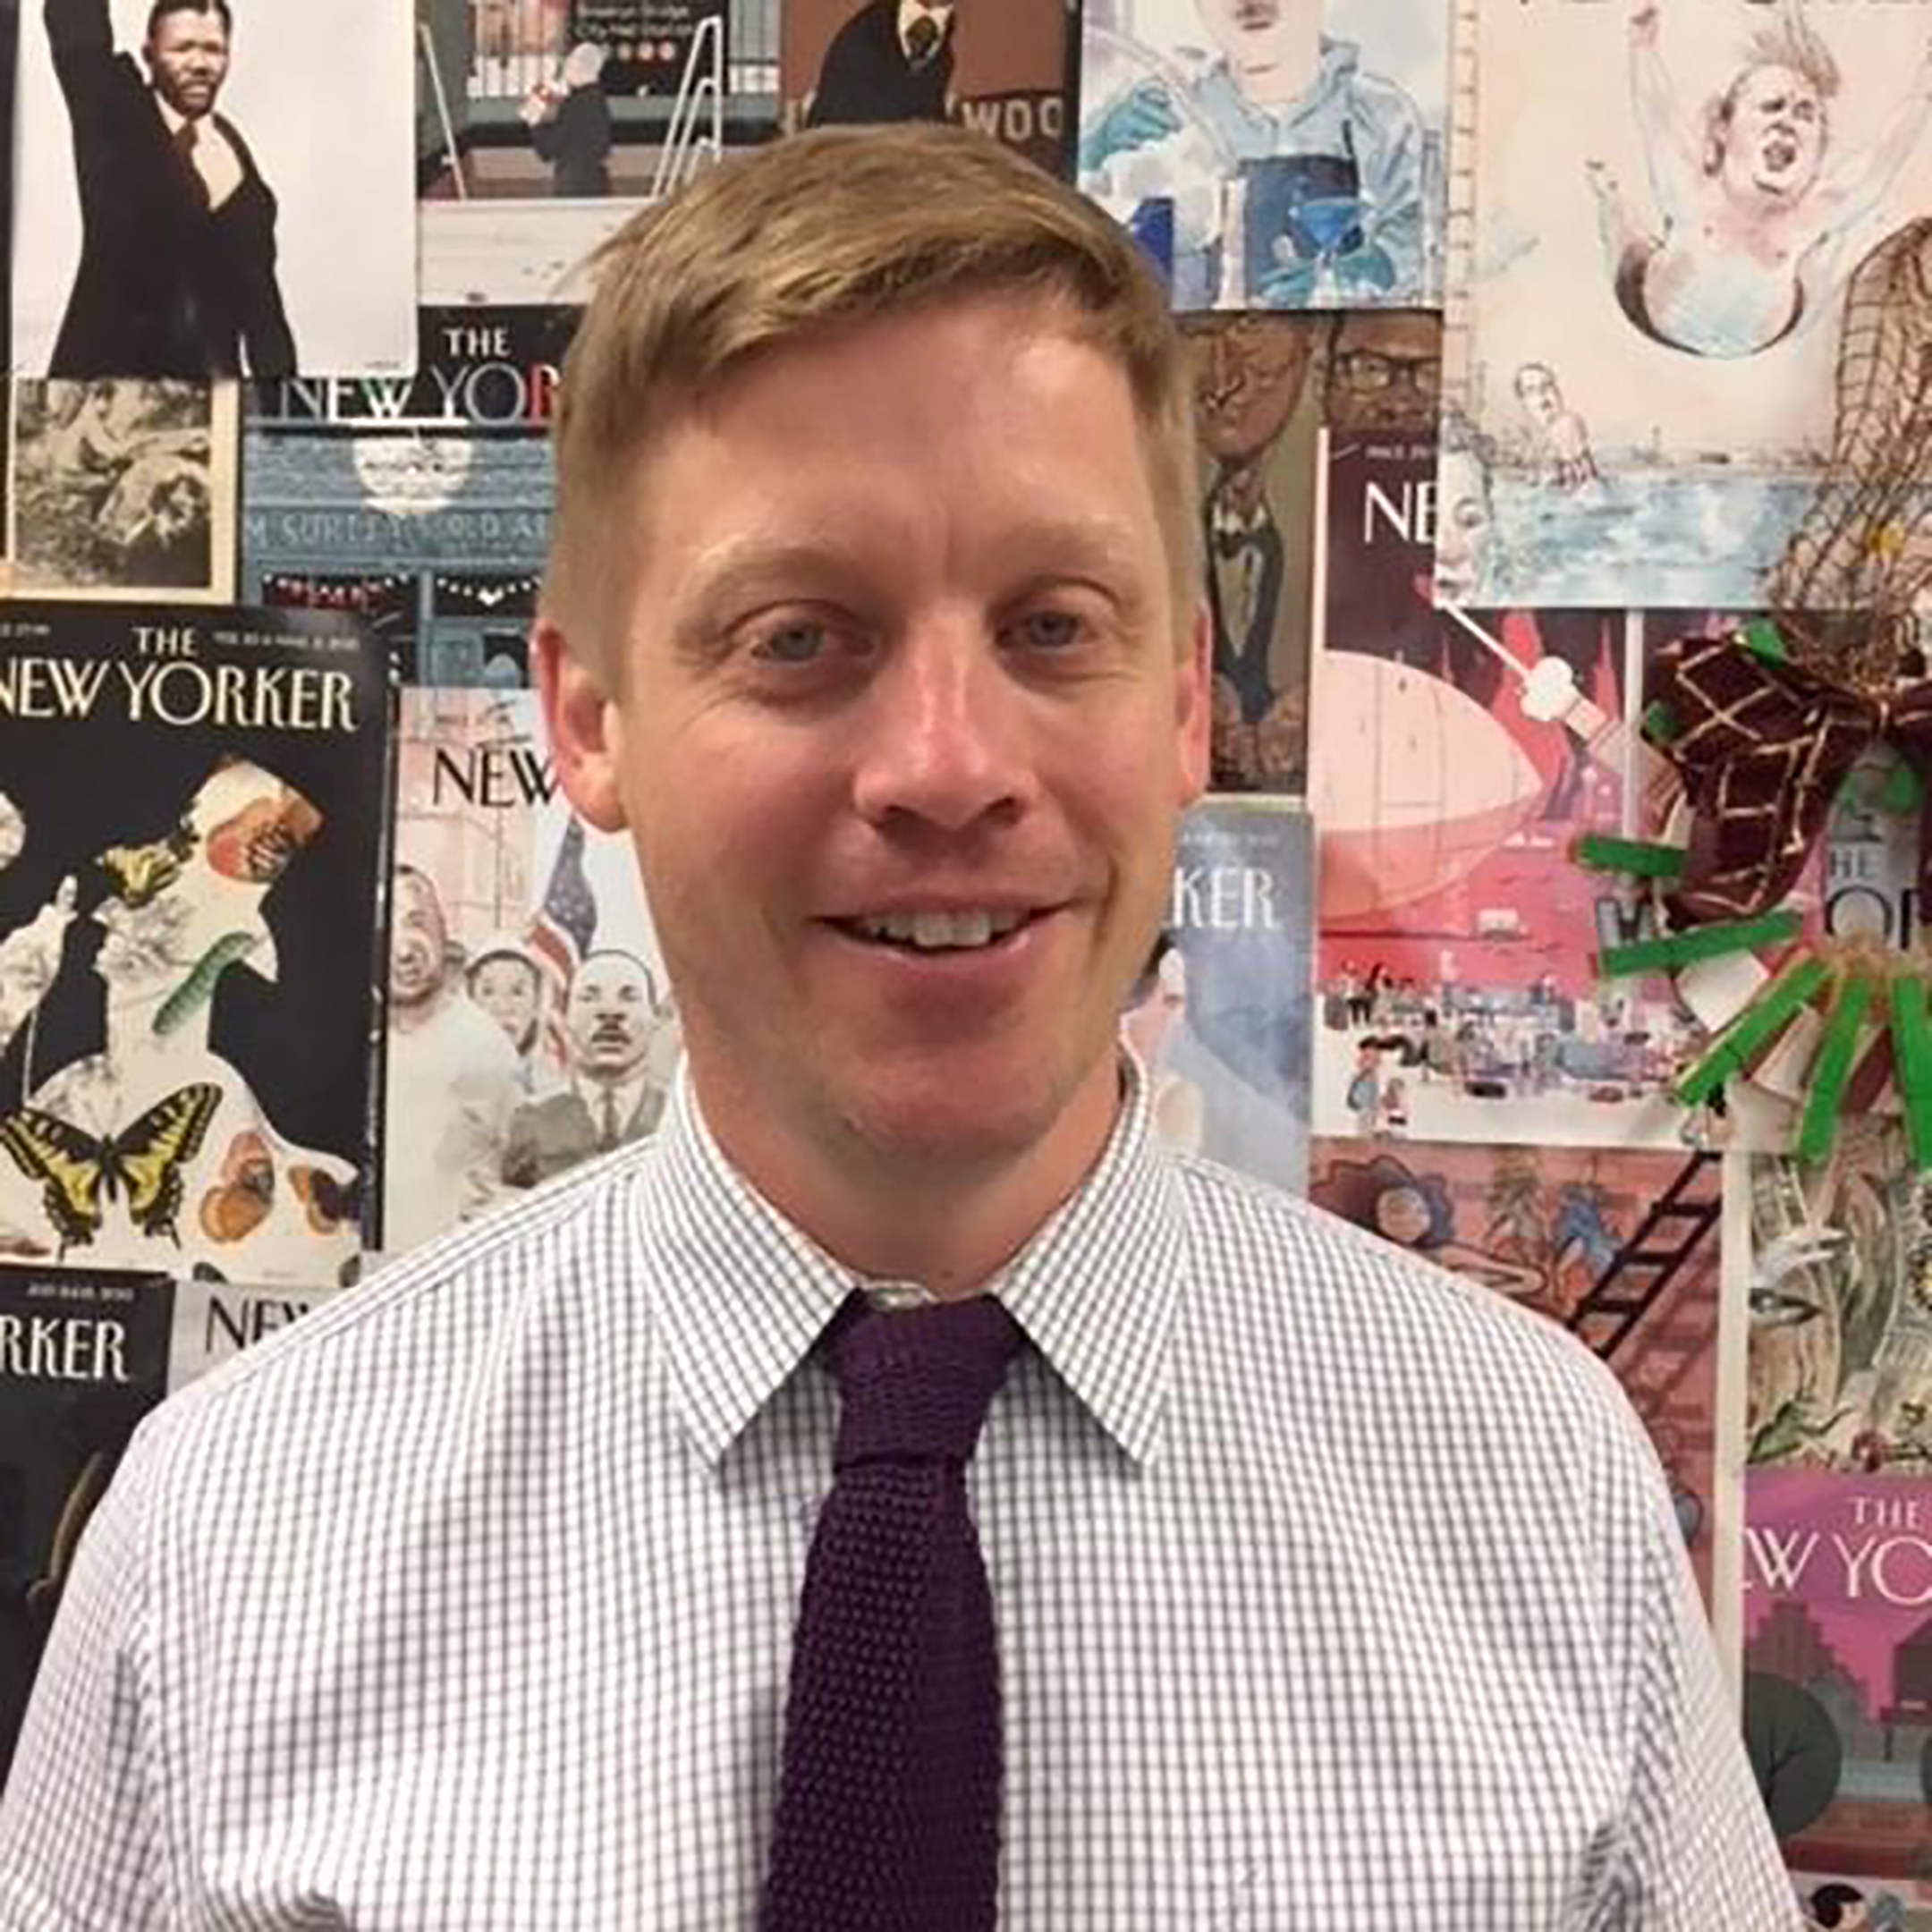 a profile photo of teacher brendan widness, taken from the chest up, showing him wearing a white shirt and dark tie and standing in front of a wall papered with covers of the new yorker magazine